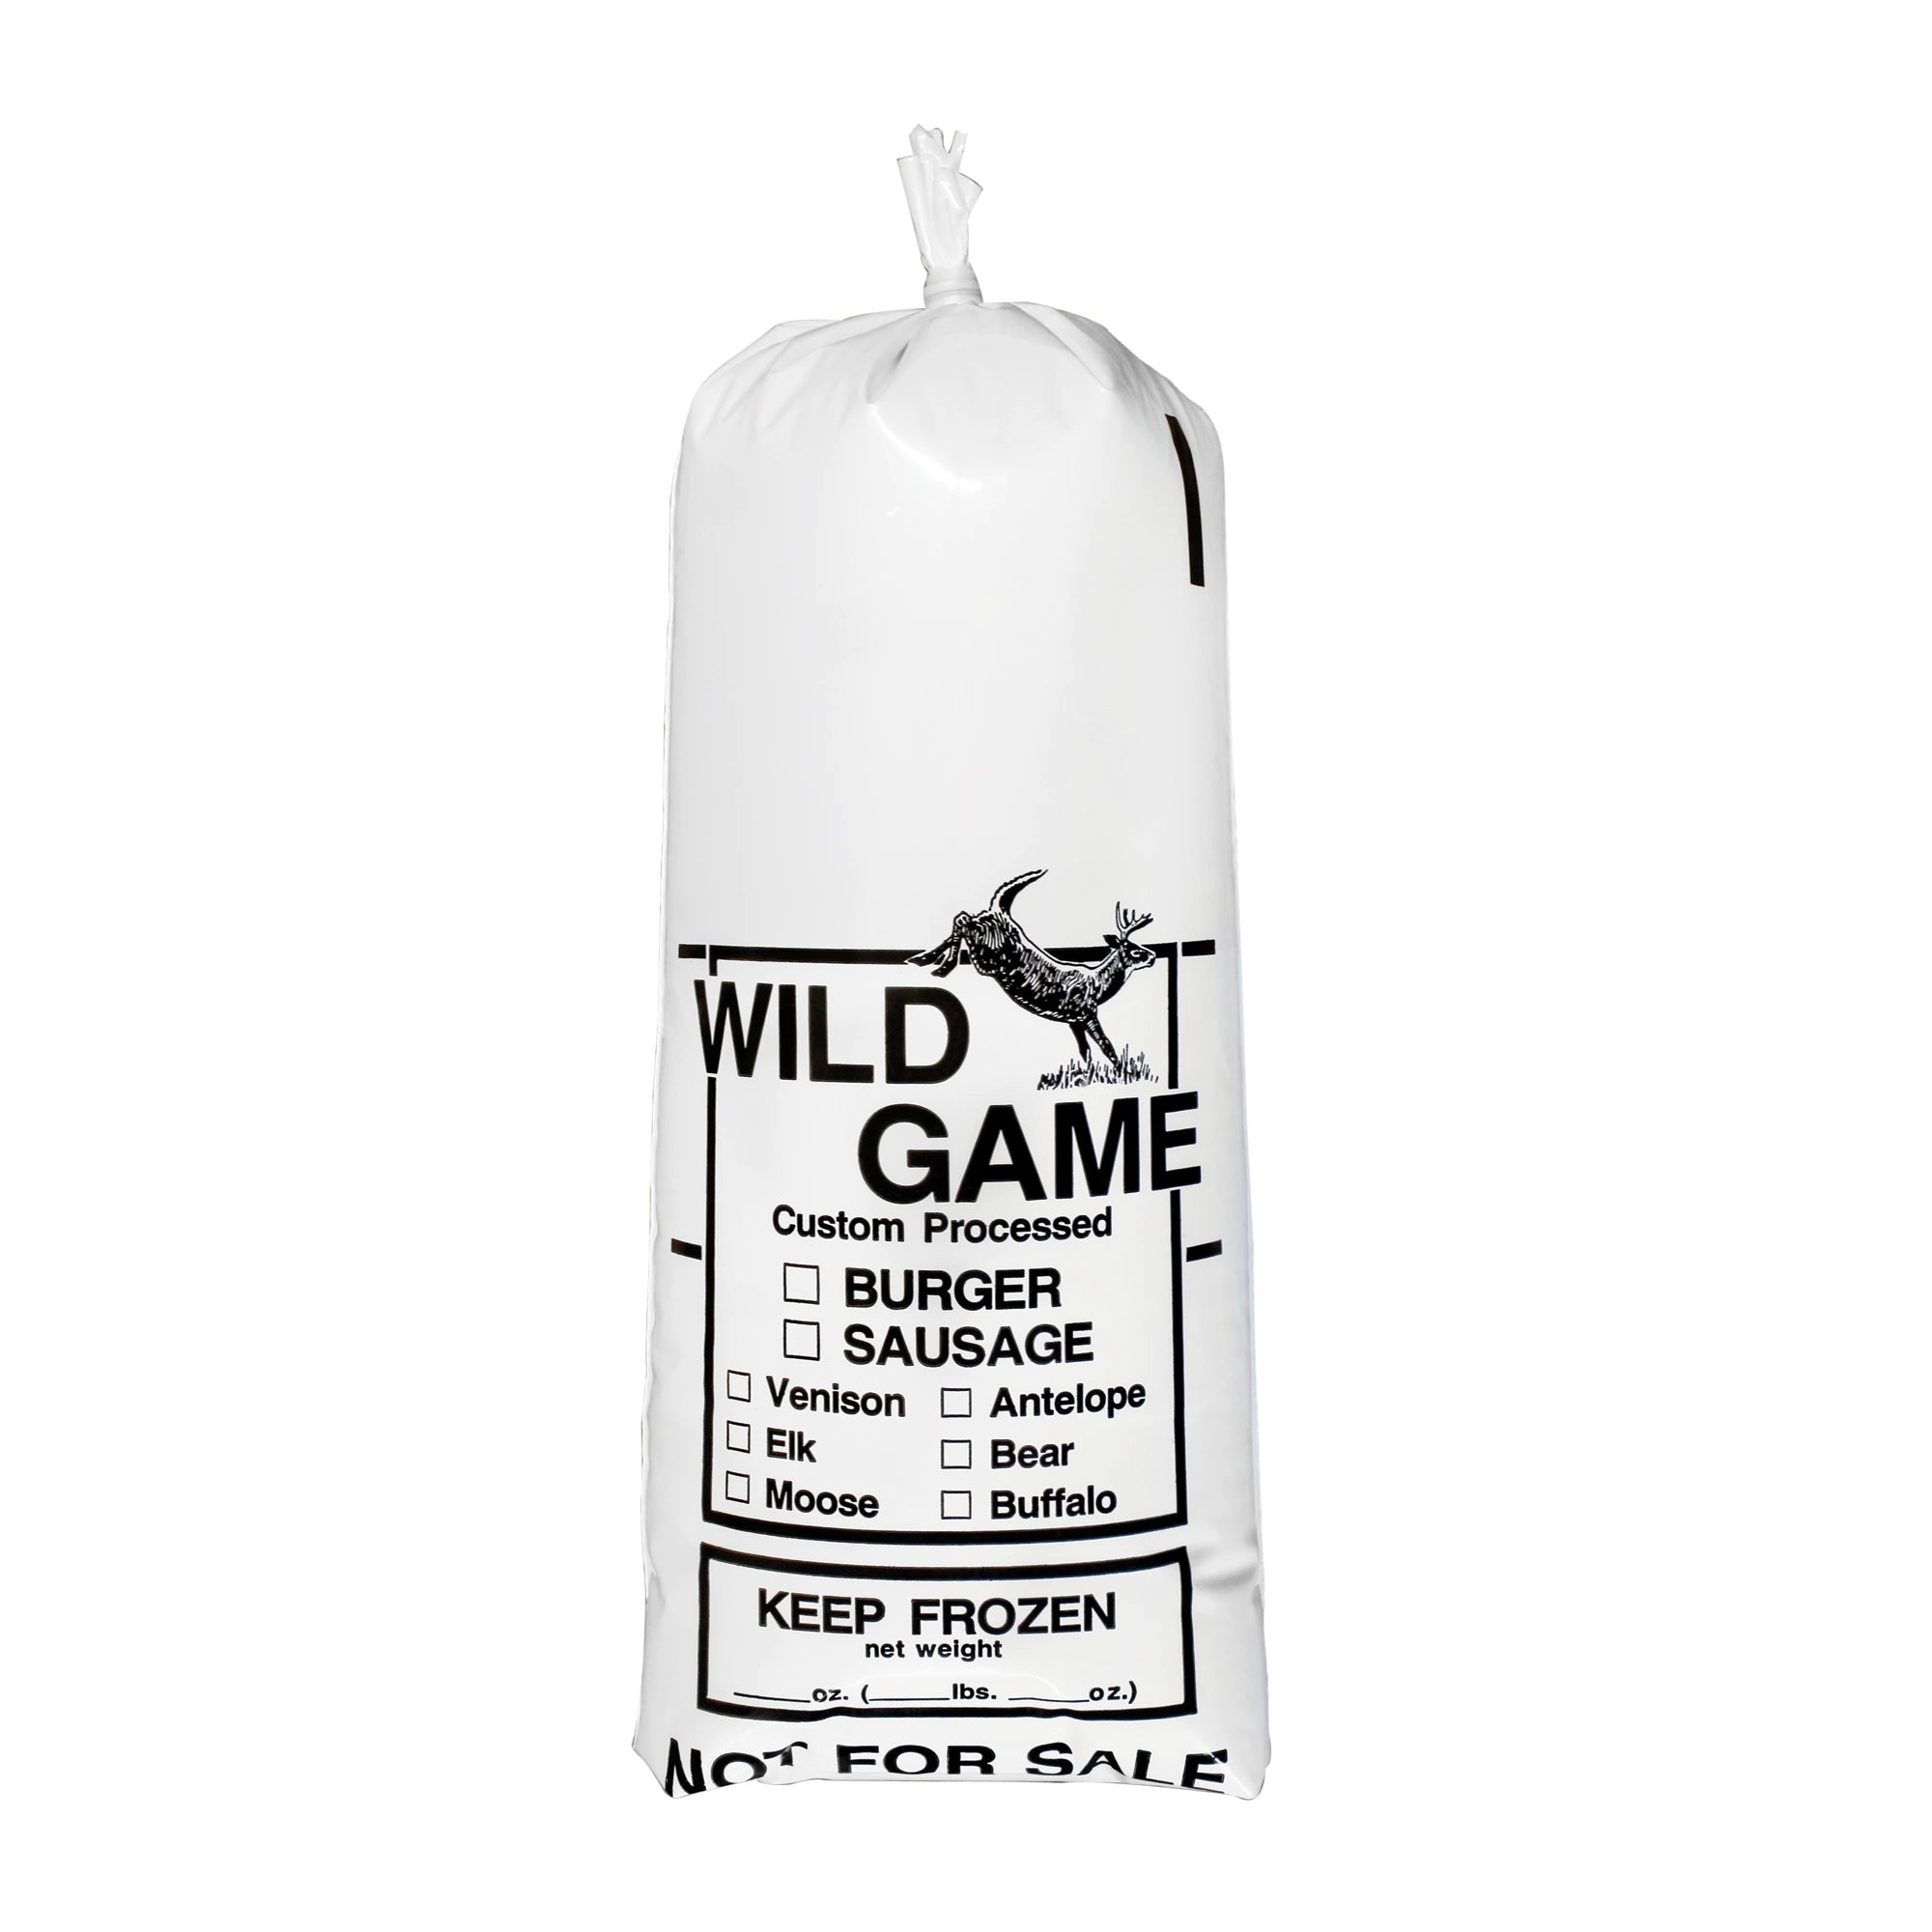 Wild Game Meat Bags - Bunzl Processor Division